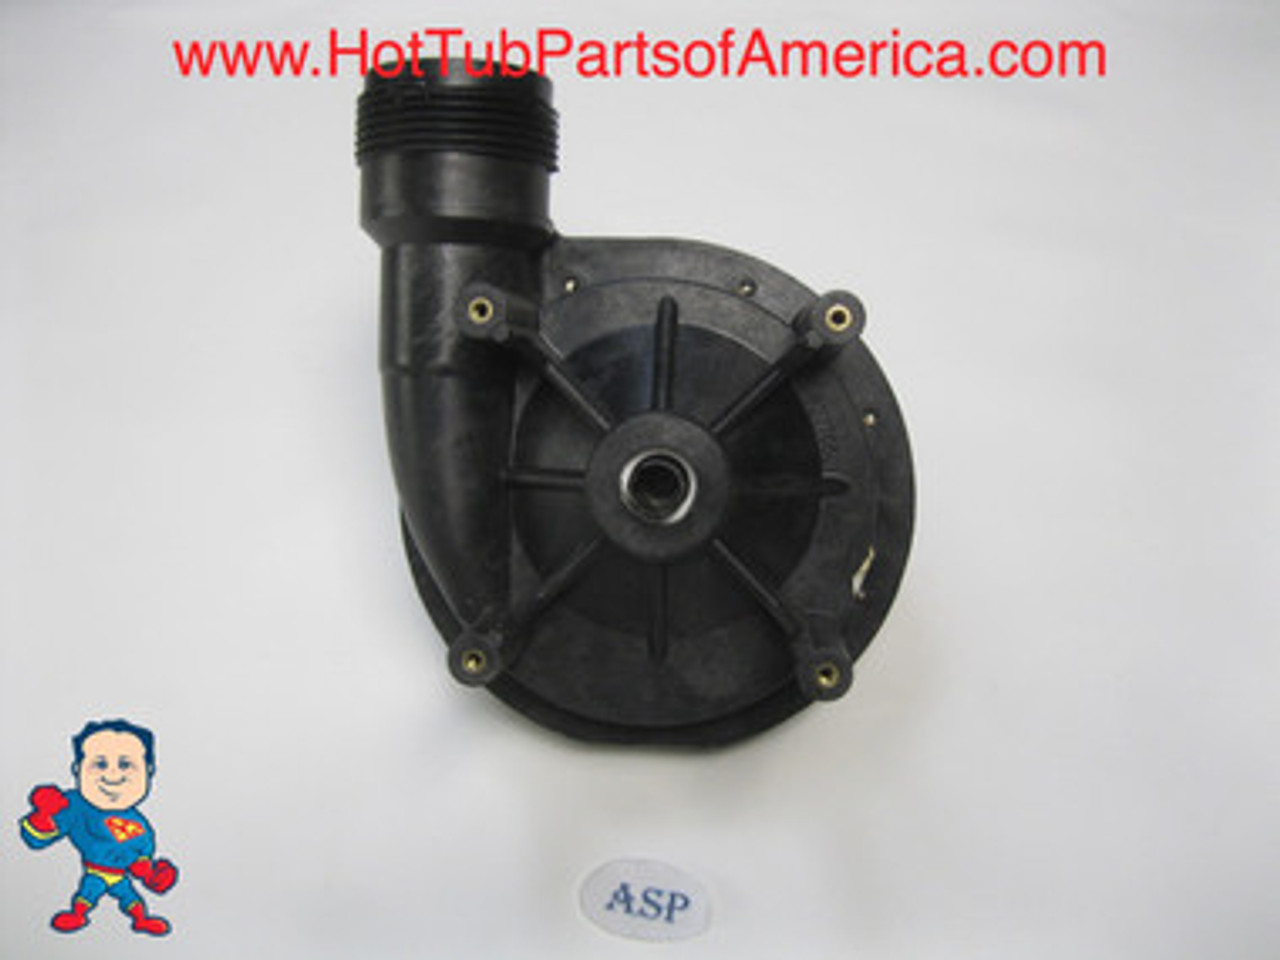 Wet End, Aqua-Flo, FMHP, 1.5HP, 1-1/2", 48 frame, 9.0A/230V, 14A/115v
This is a 48 Frame Wet End and the Thru-Bolts are about 5 1/4" apart in a cross pattern and 3 5/8" Side to Side....Also the bolt heads on the thru-bolts are 1/4" on a 48 frame motor..IF your bolt heads are 5/16" you have a 56fr motor and this wet end will not work..